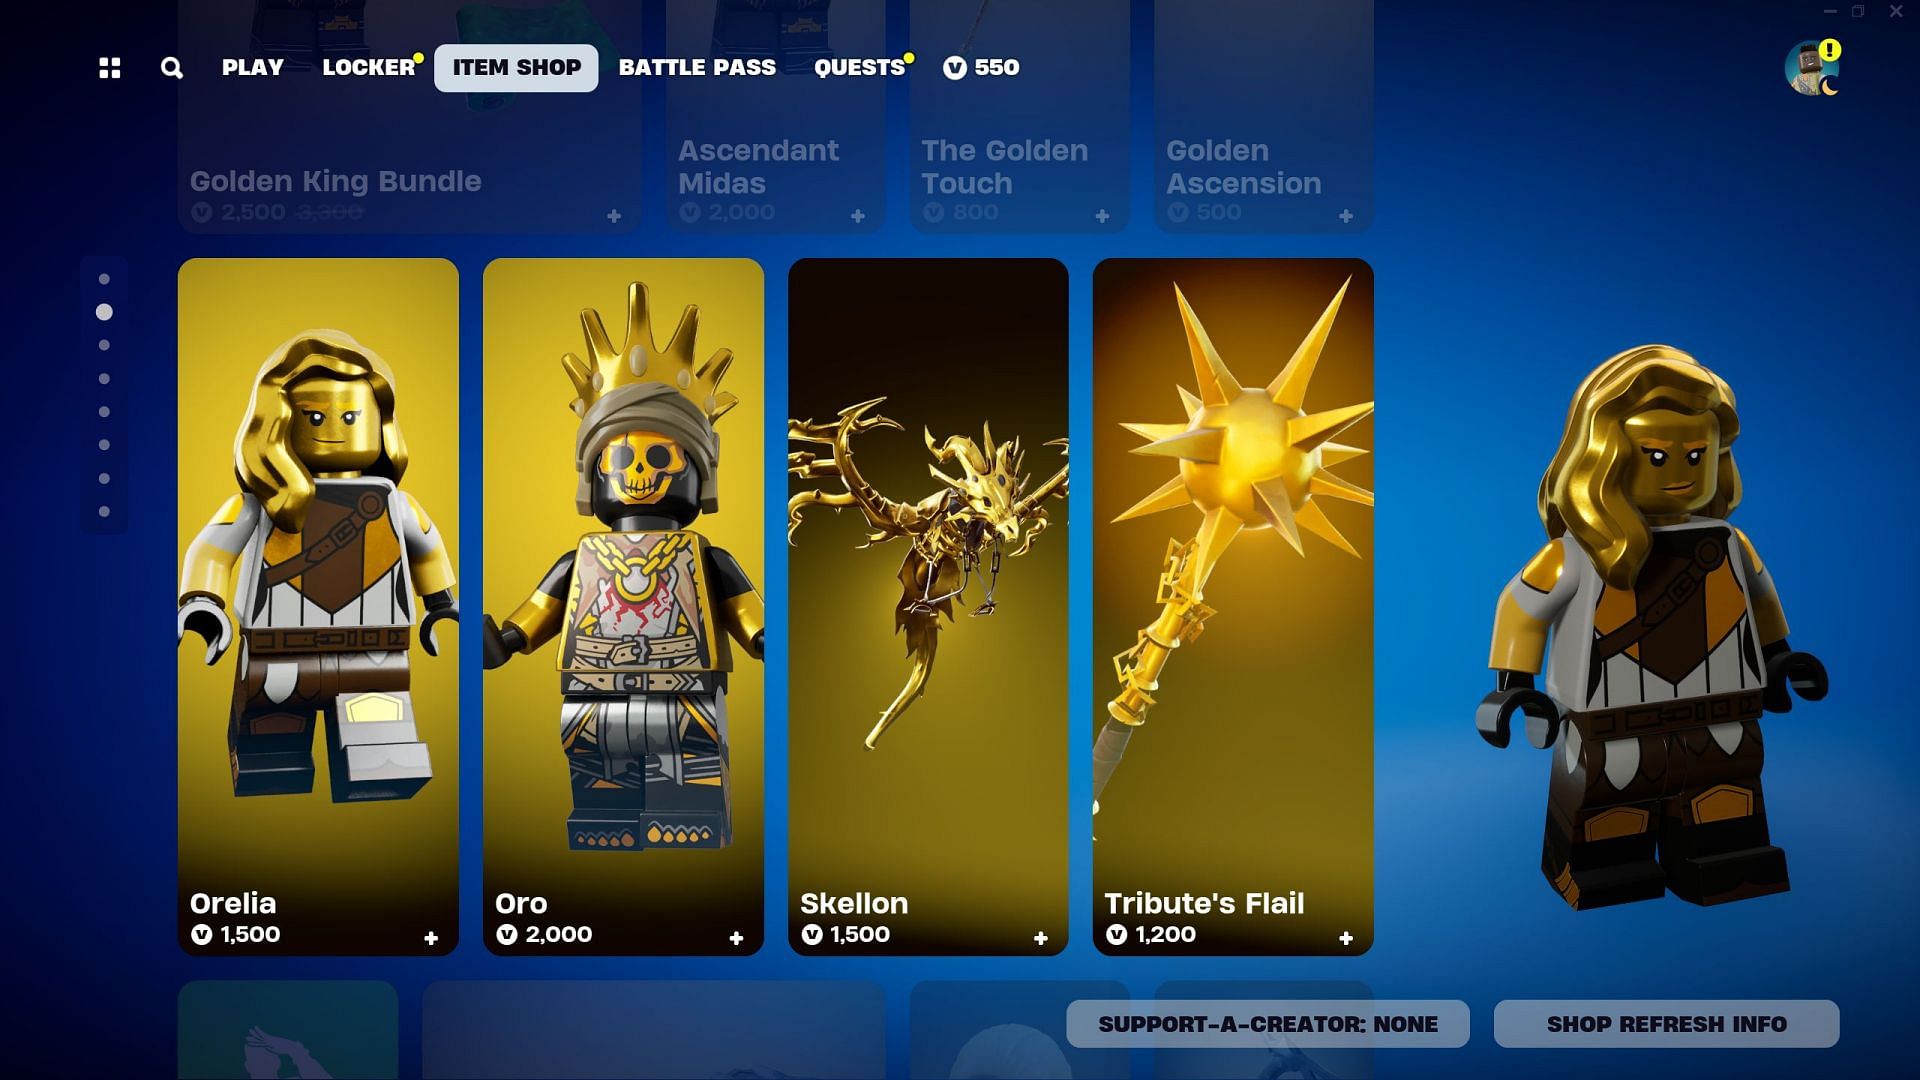 Orelia and Oro Skins are currently listed in the Item Shop (Image via Epic Games/Fortnite)